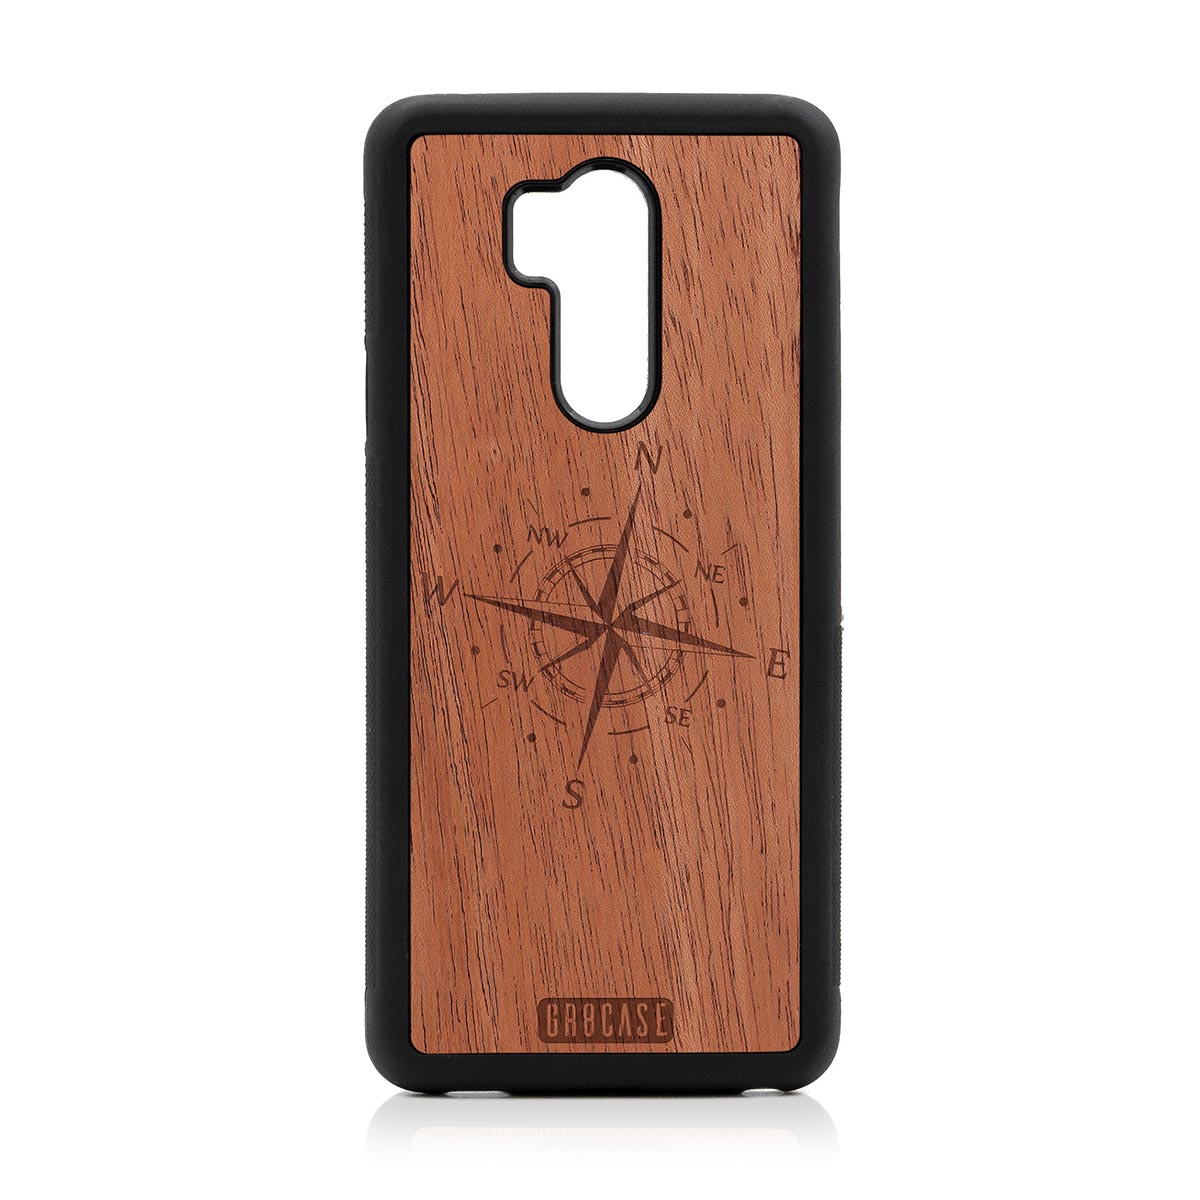 Compass Design Wood Case LG G7 ThinQ by GR8CASE